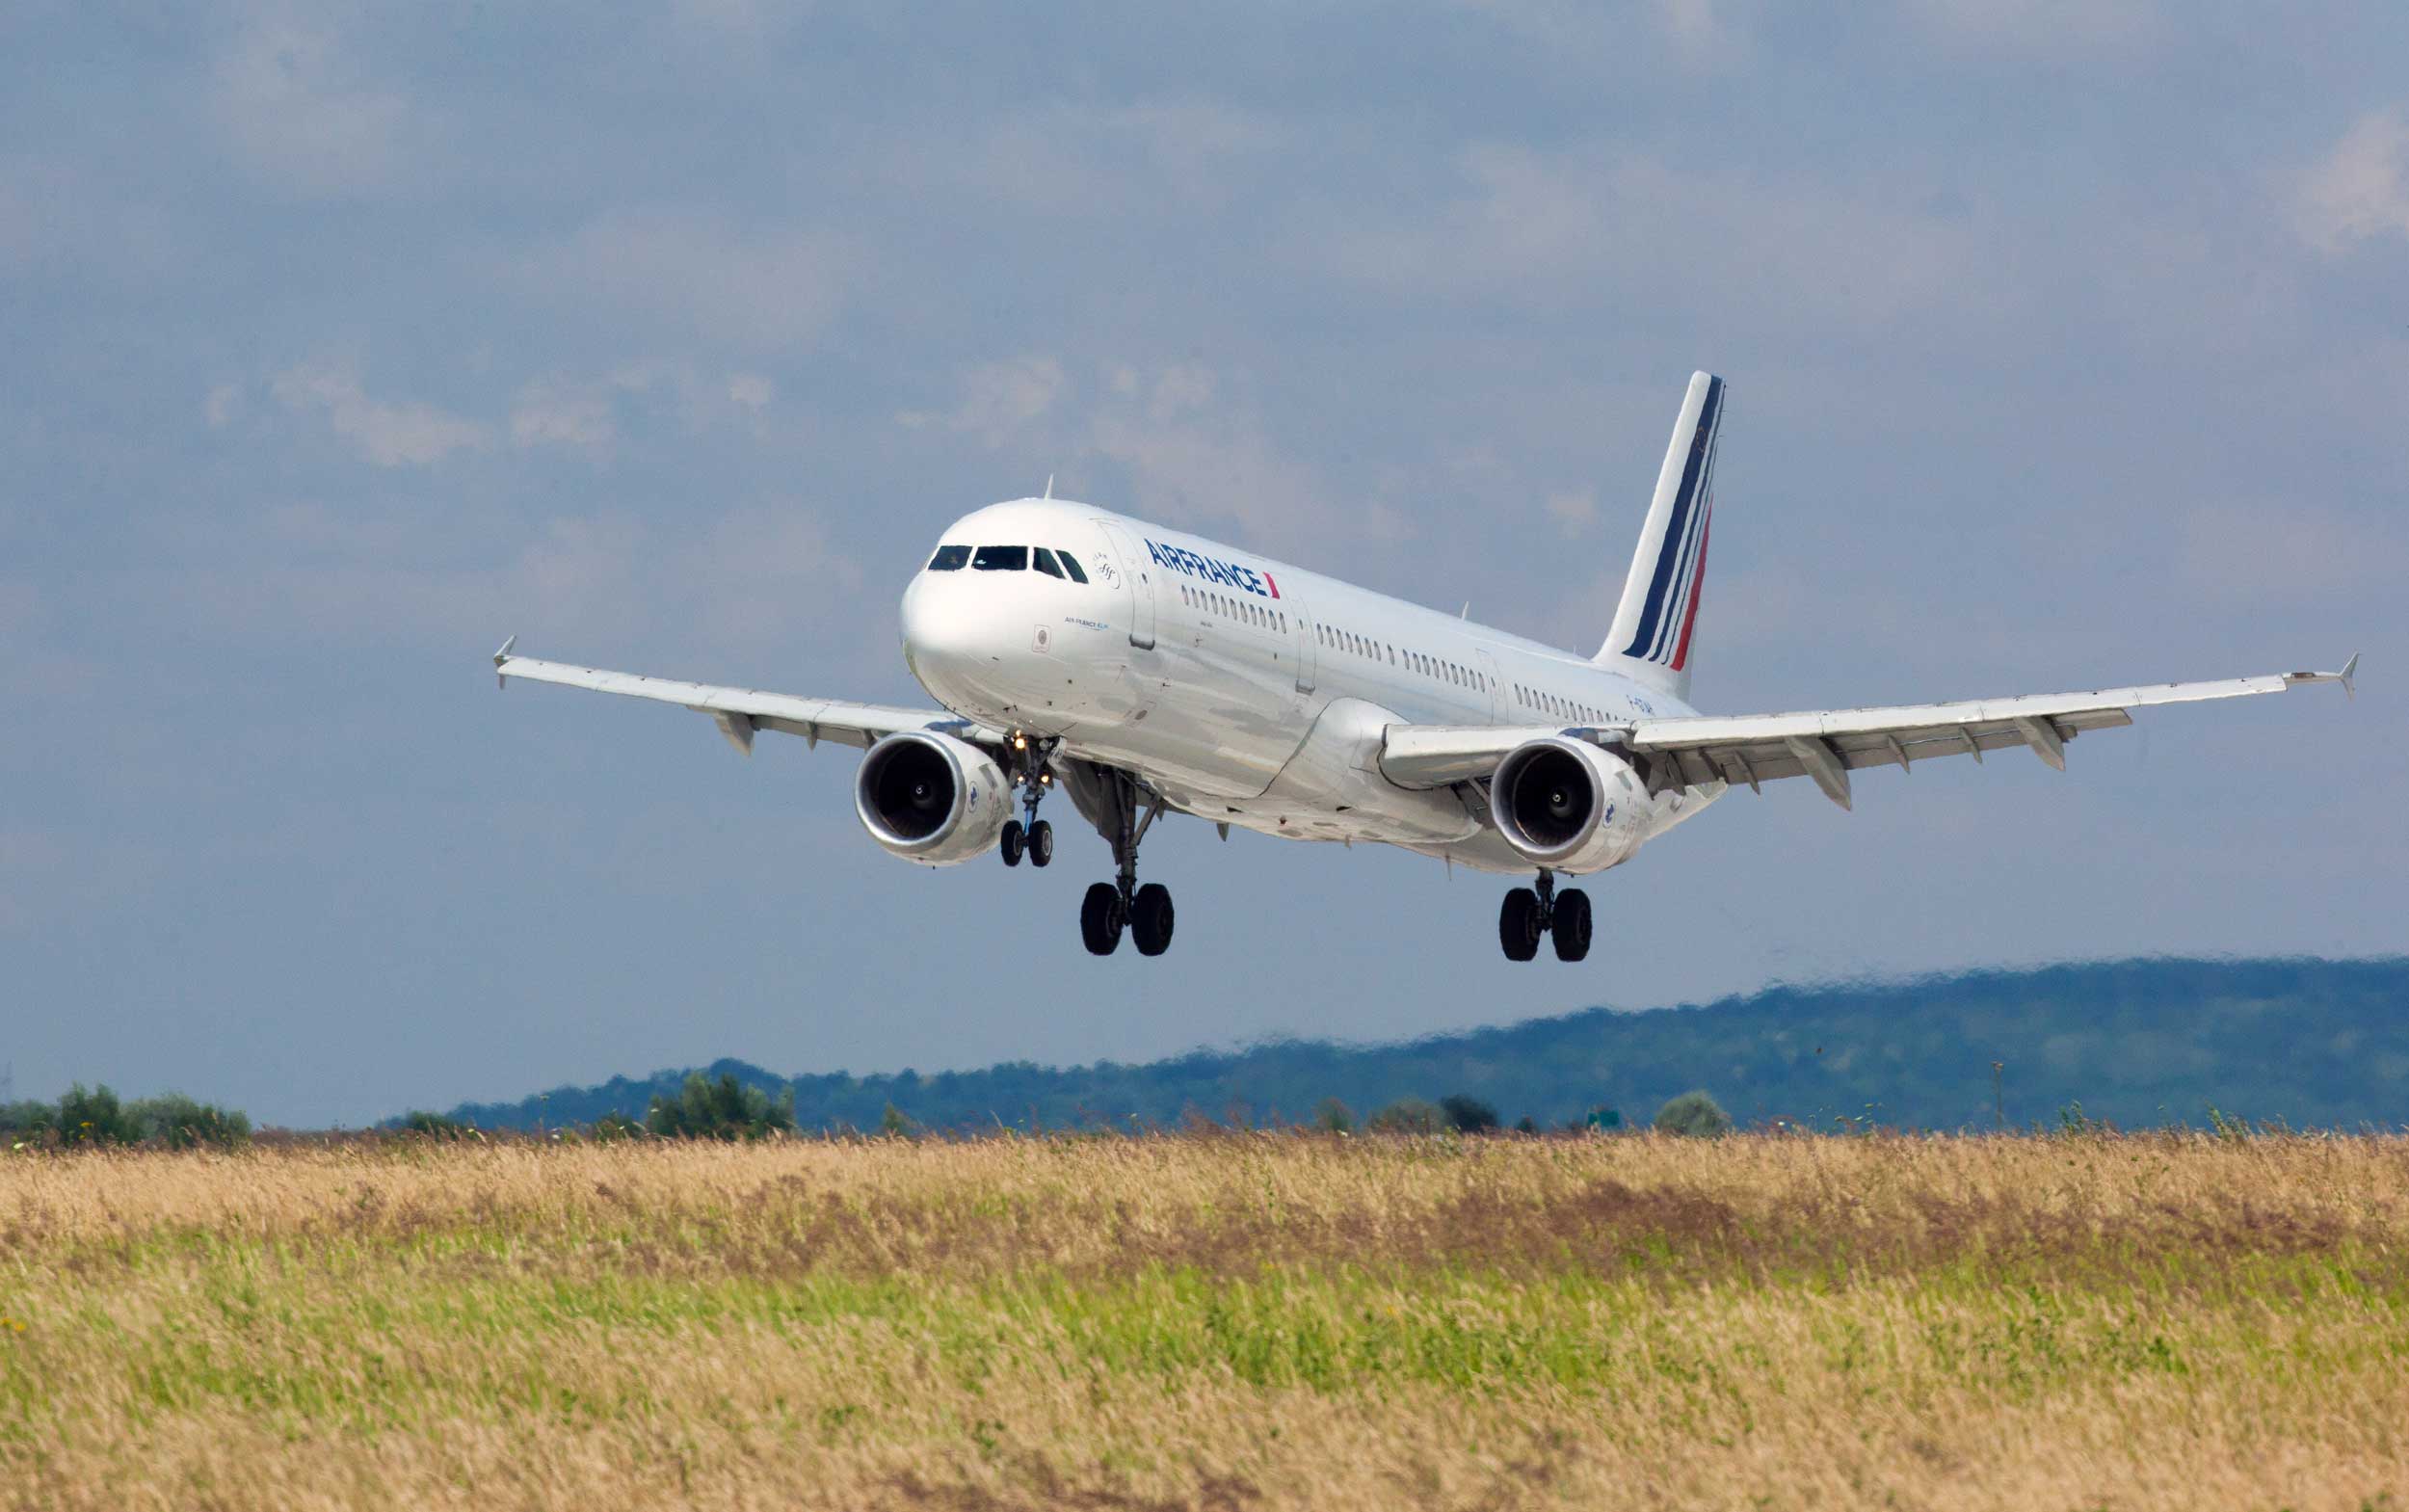 Air France to pay for cadet pilot training